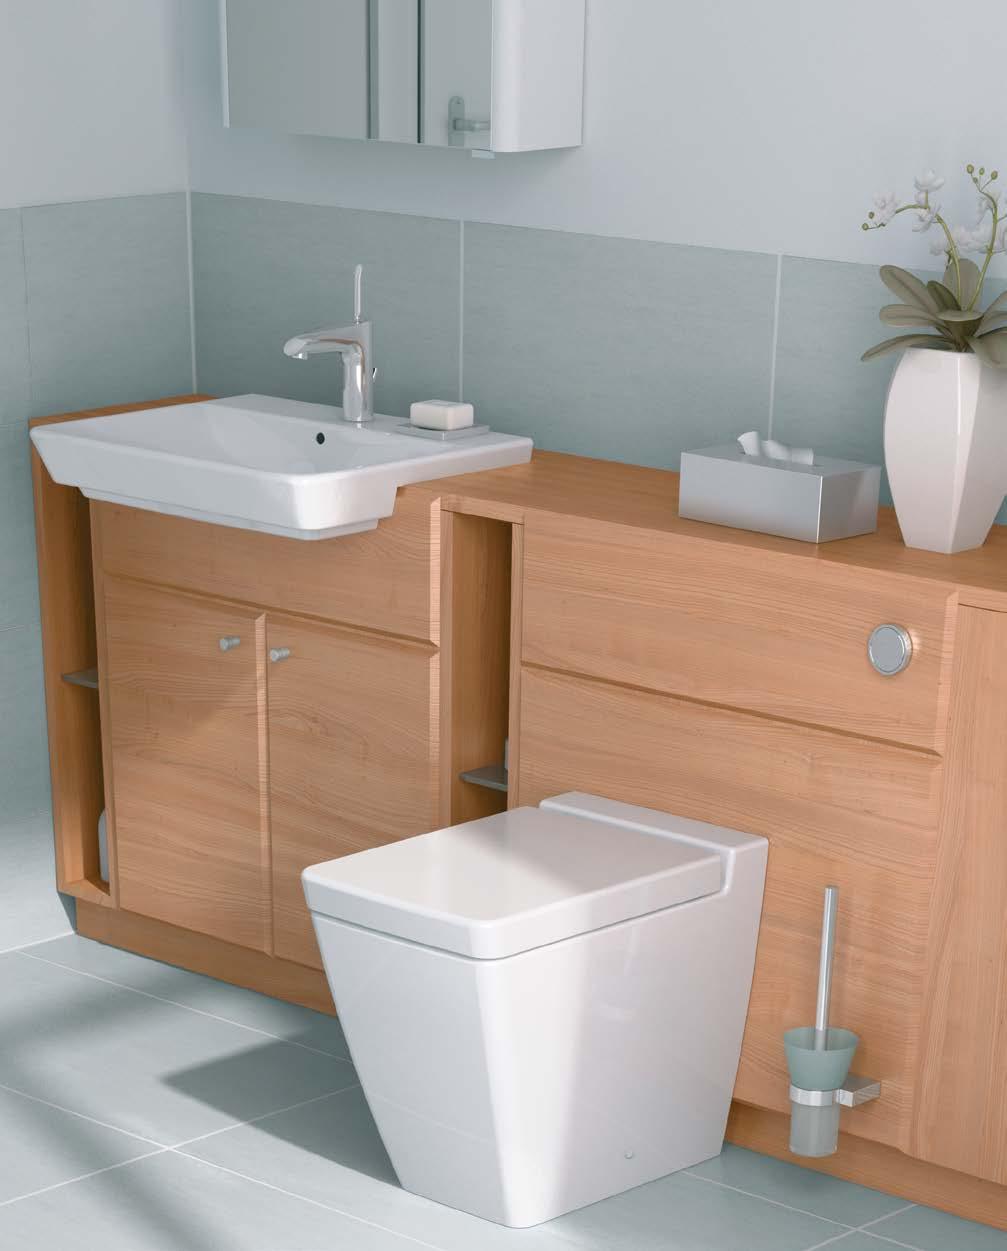 A41236 Basin mixer 283 T4 WASHBASINS ARE AVAILABLE IN A RANGE OF SIZES WITH EITHER